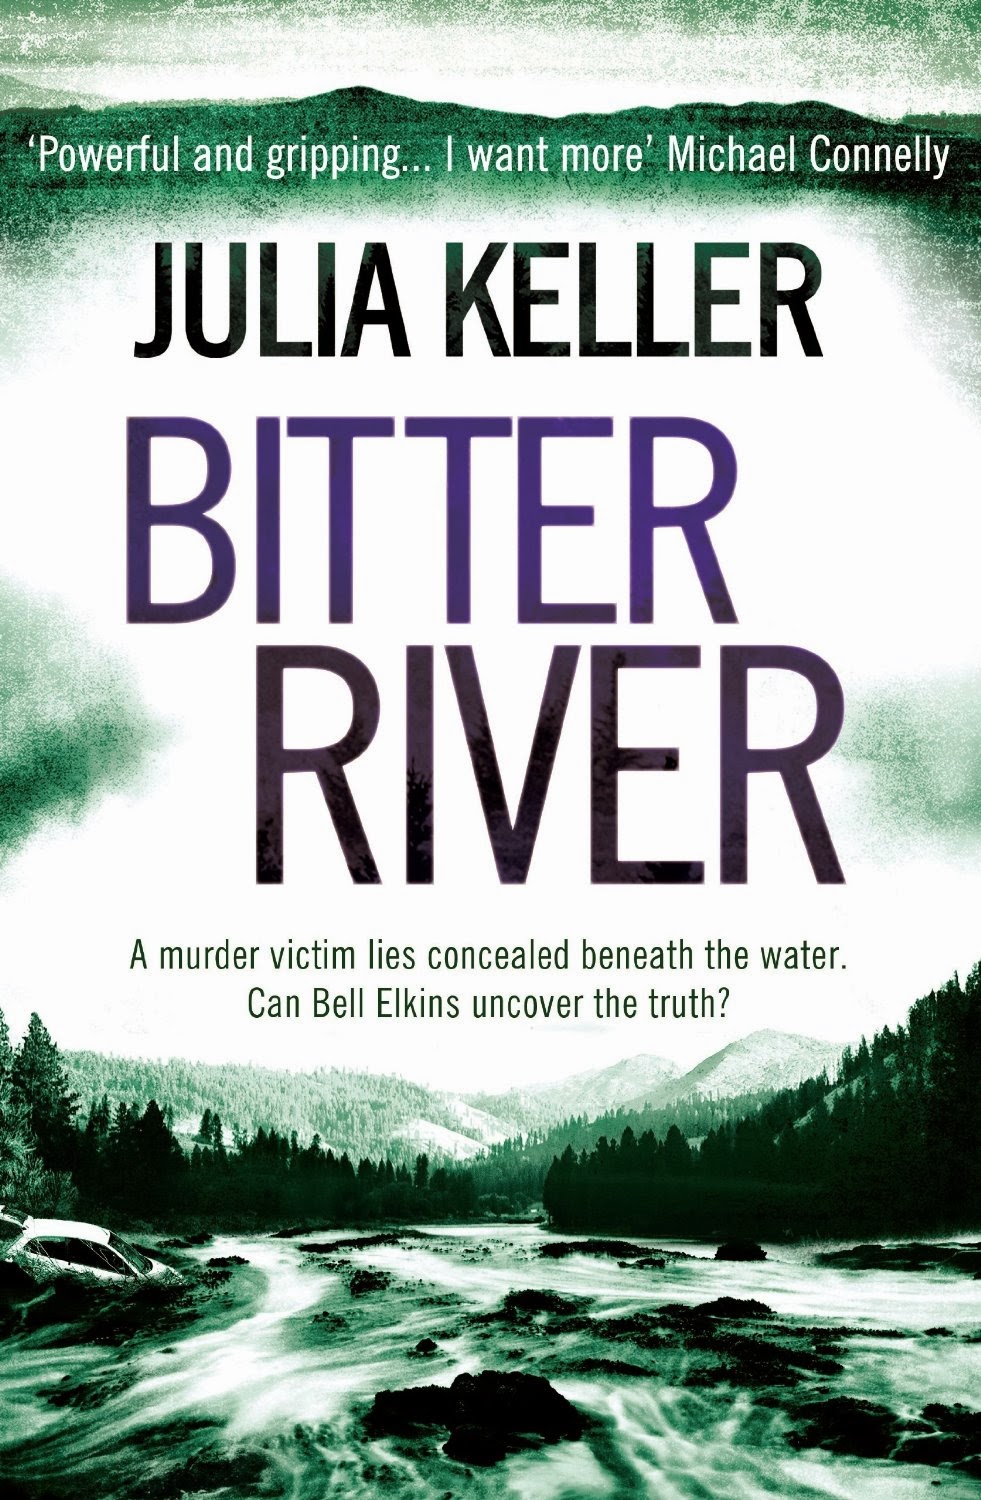 This book is very to read. Bitter River.